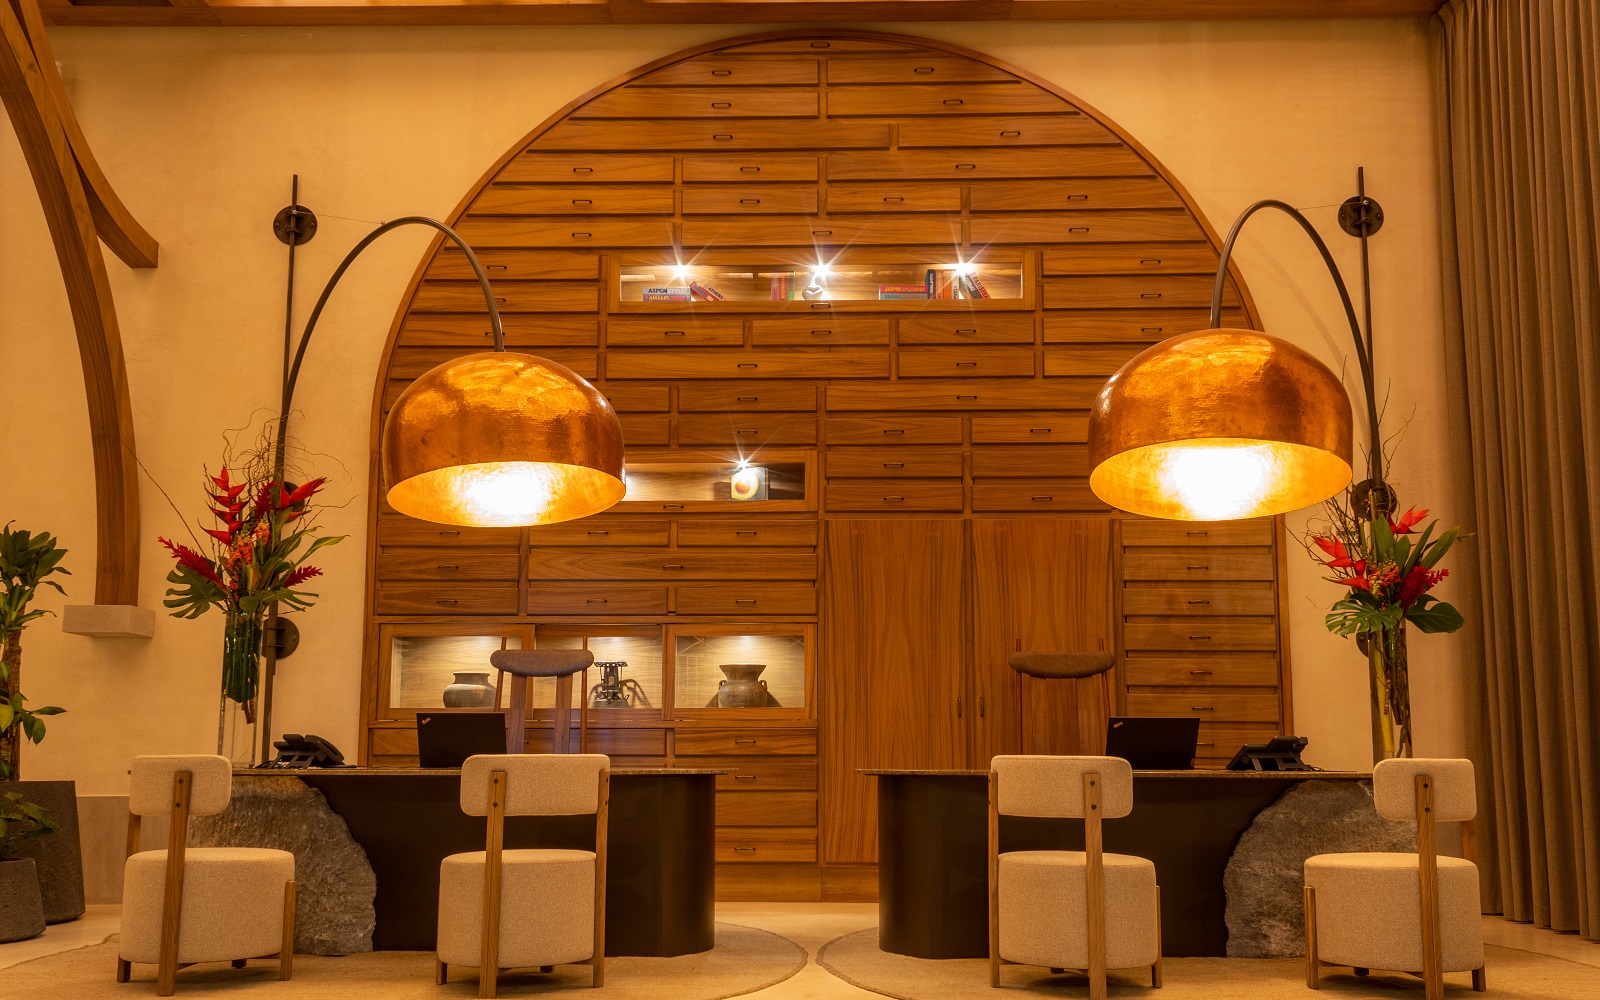 Front desk at NUMU with wood panelling and statement bell lighting Hyatt Unbound Collection